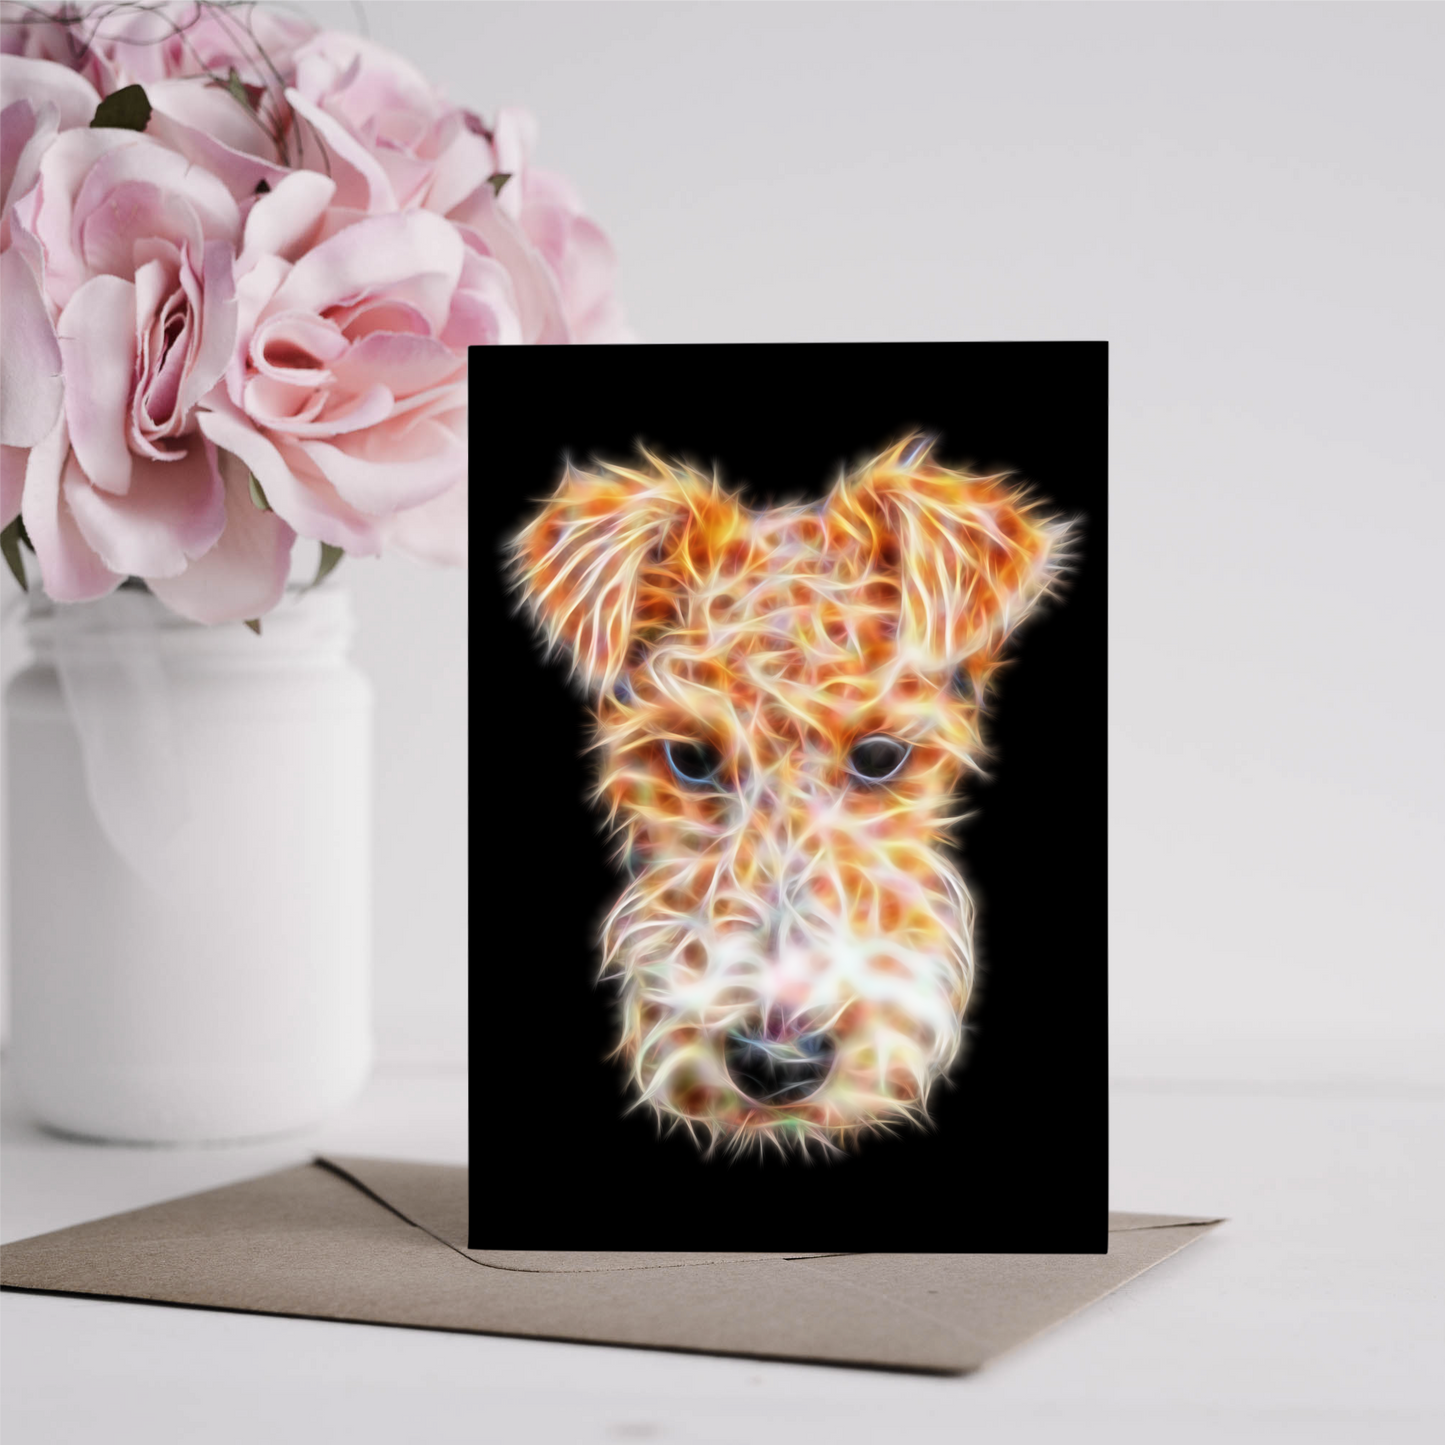 Fox Terrier Dog Greeting Card Blank Inside for Birthdays or any other Occasion